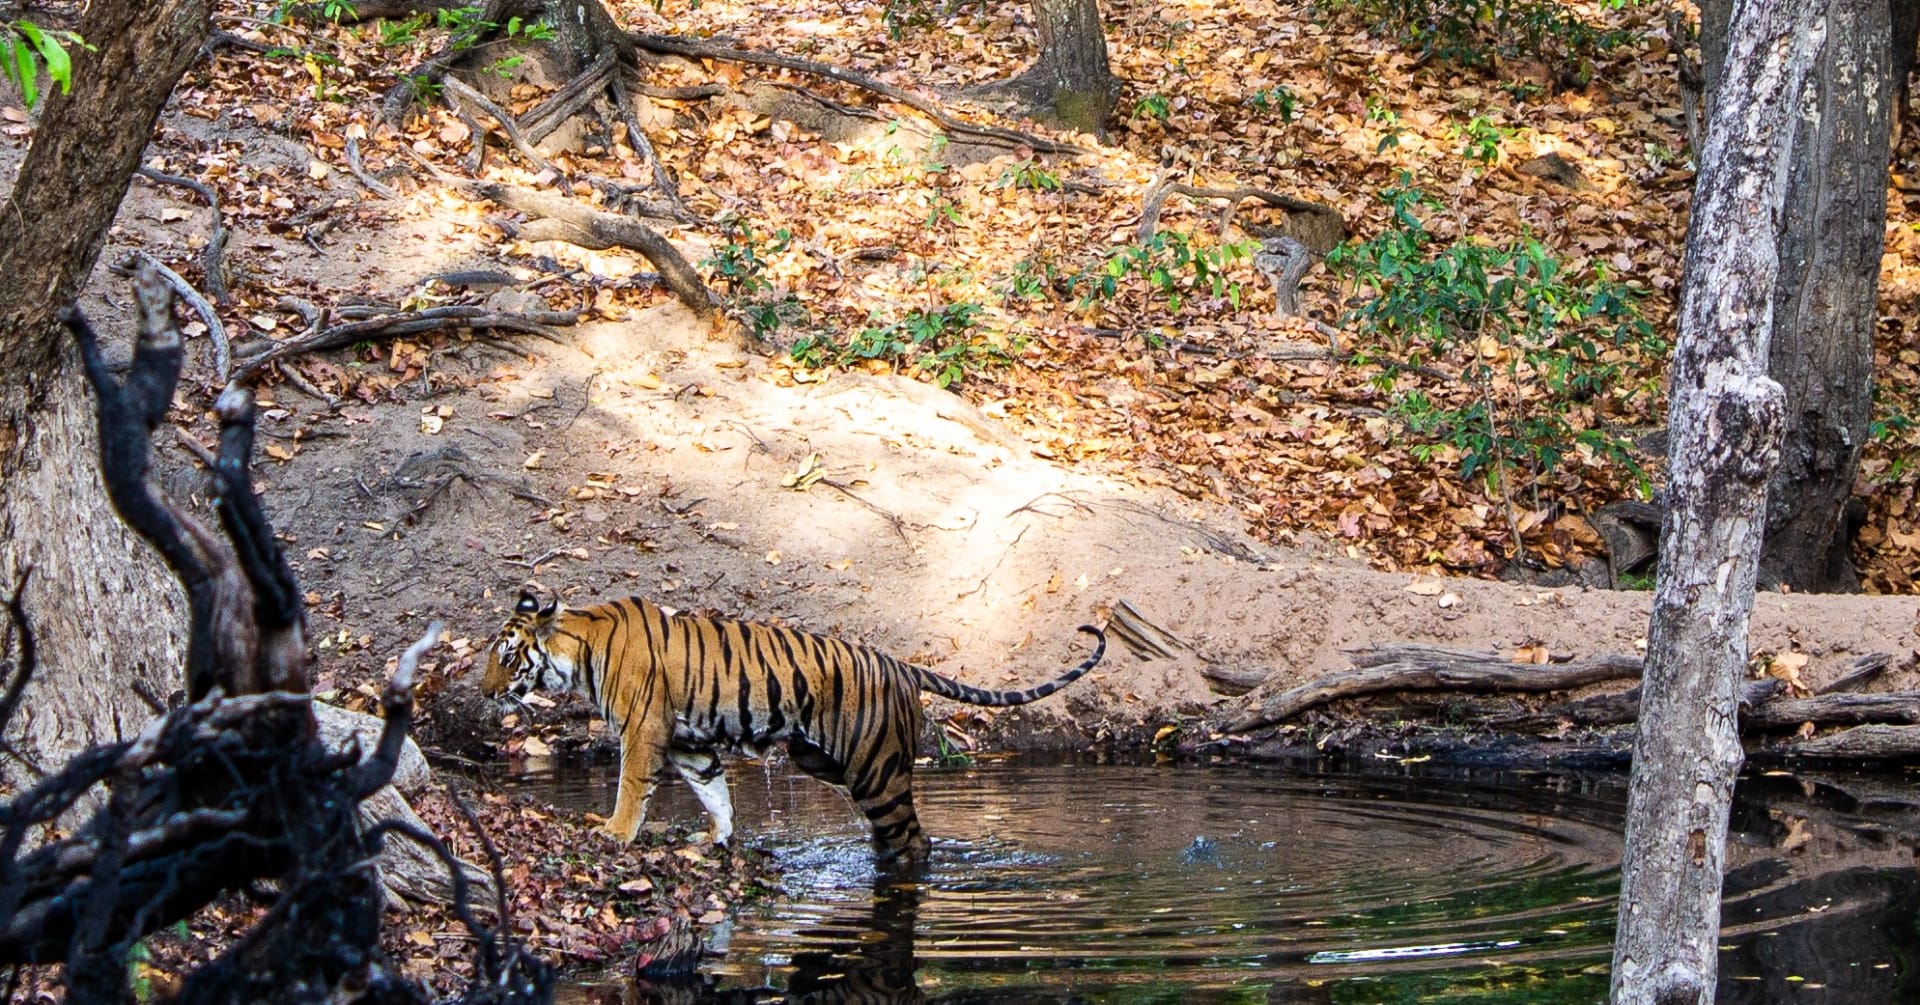 Top tips for a tiger safari in India